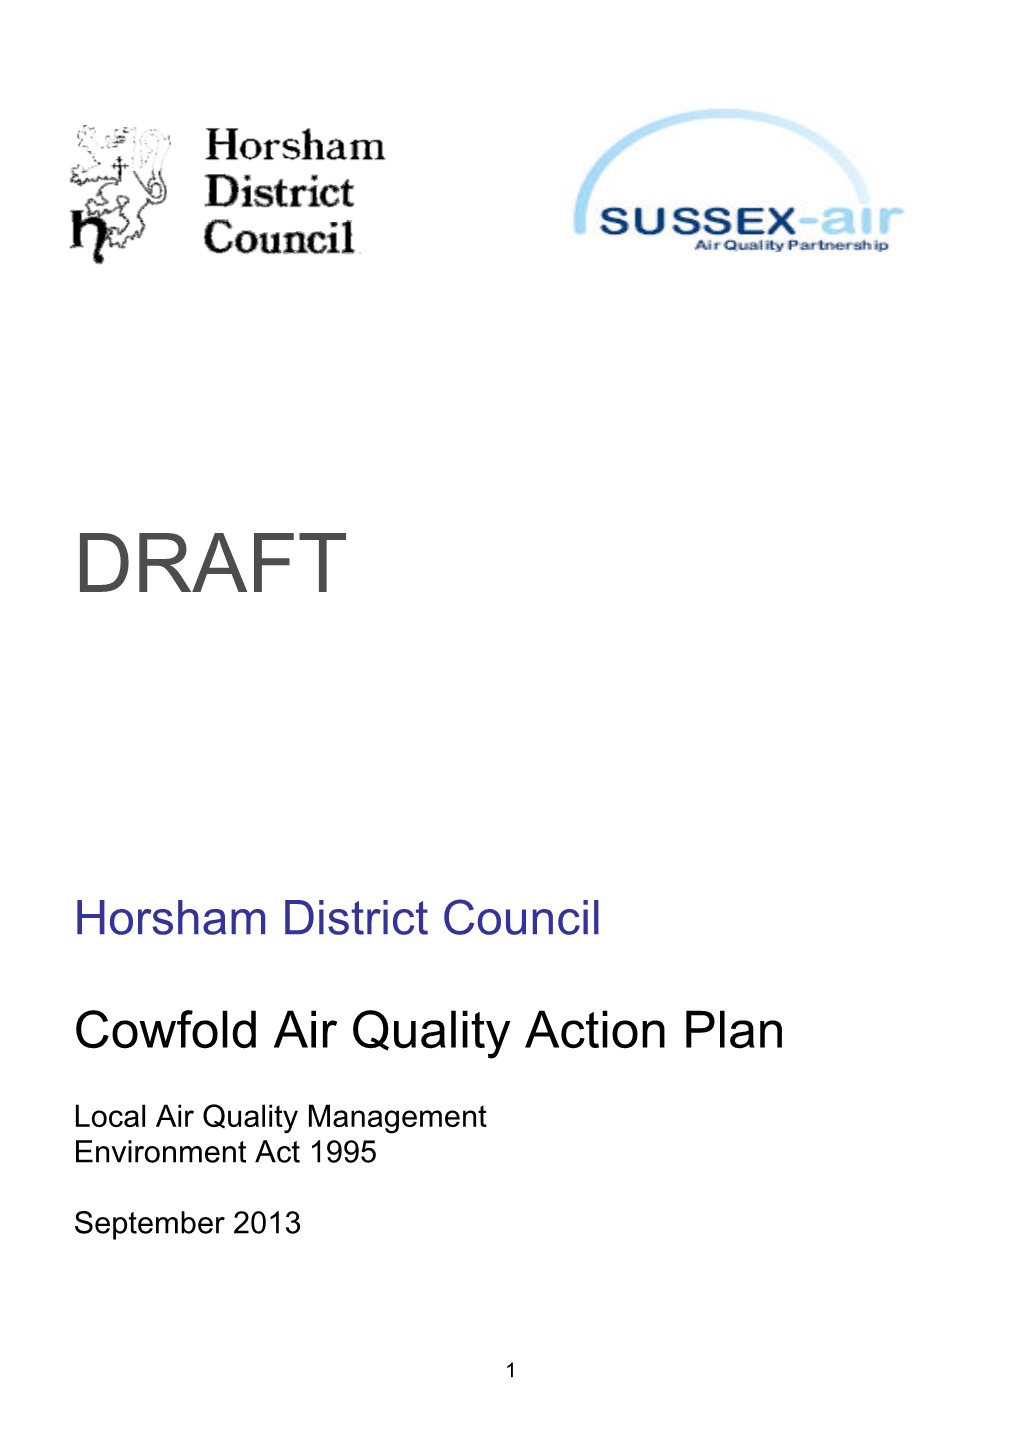 Draft Cowfold Air Quality Action Plan 2013